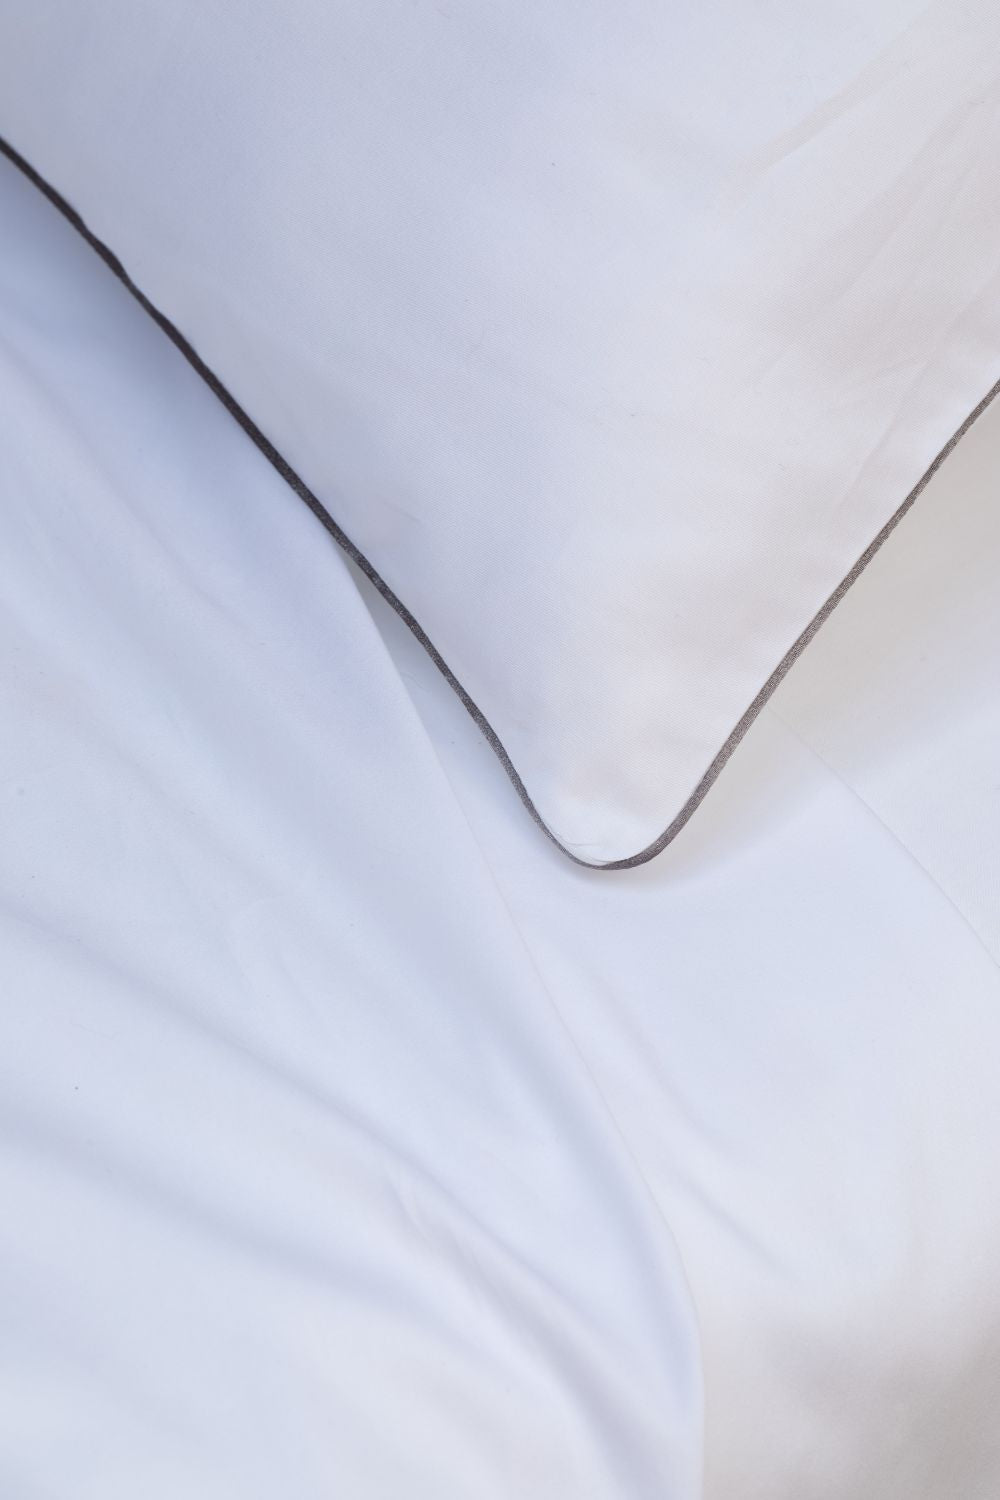 VITTORIA-Duvet cover in plain cotton with piping border 